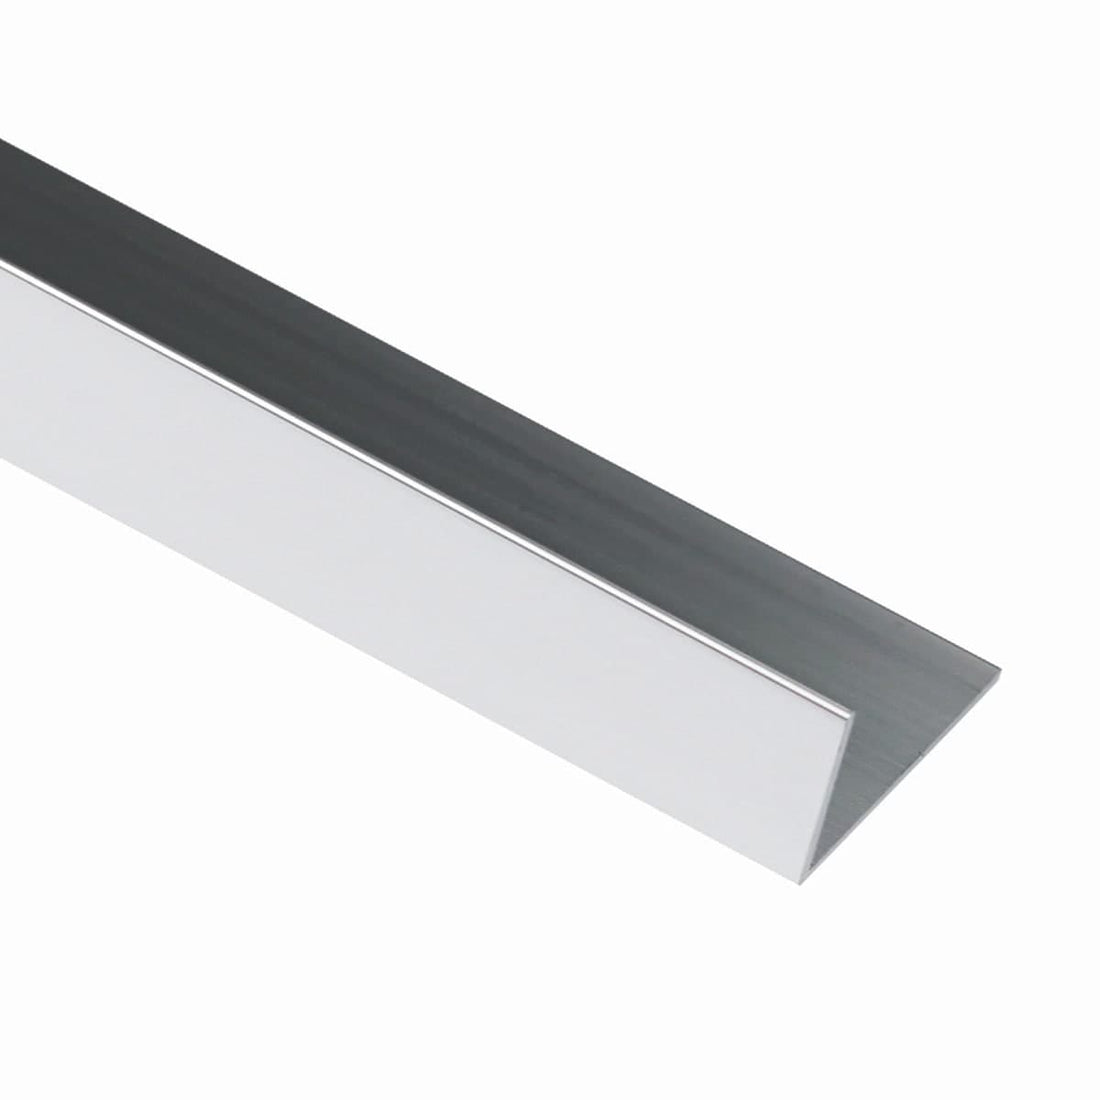 ANGLE PROFILE L MM1000X30X15 STAINLESS STEEL - best price from Maltashopper.com BR410003690